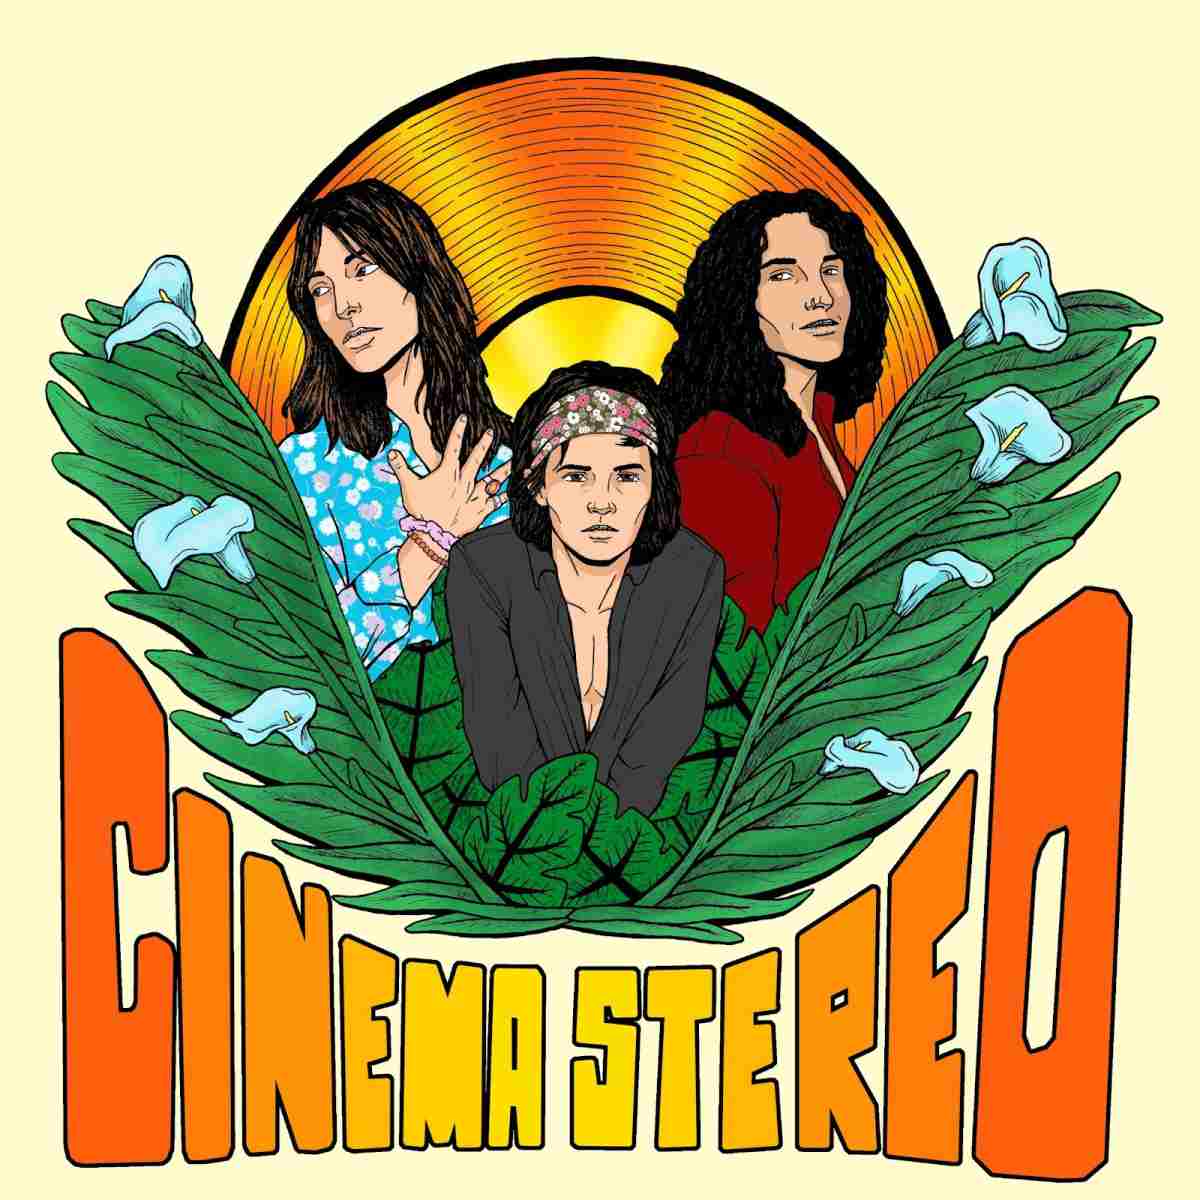 Cinema Stereo Revive Classic Rock and Release Self-titled Debut Album - Newslibre